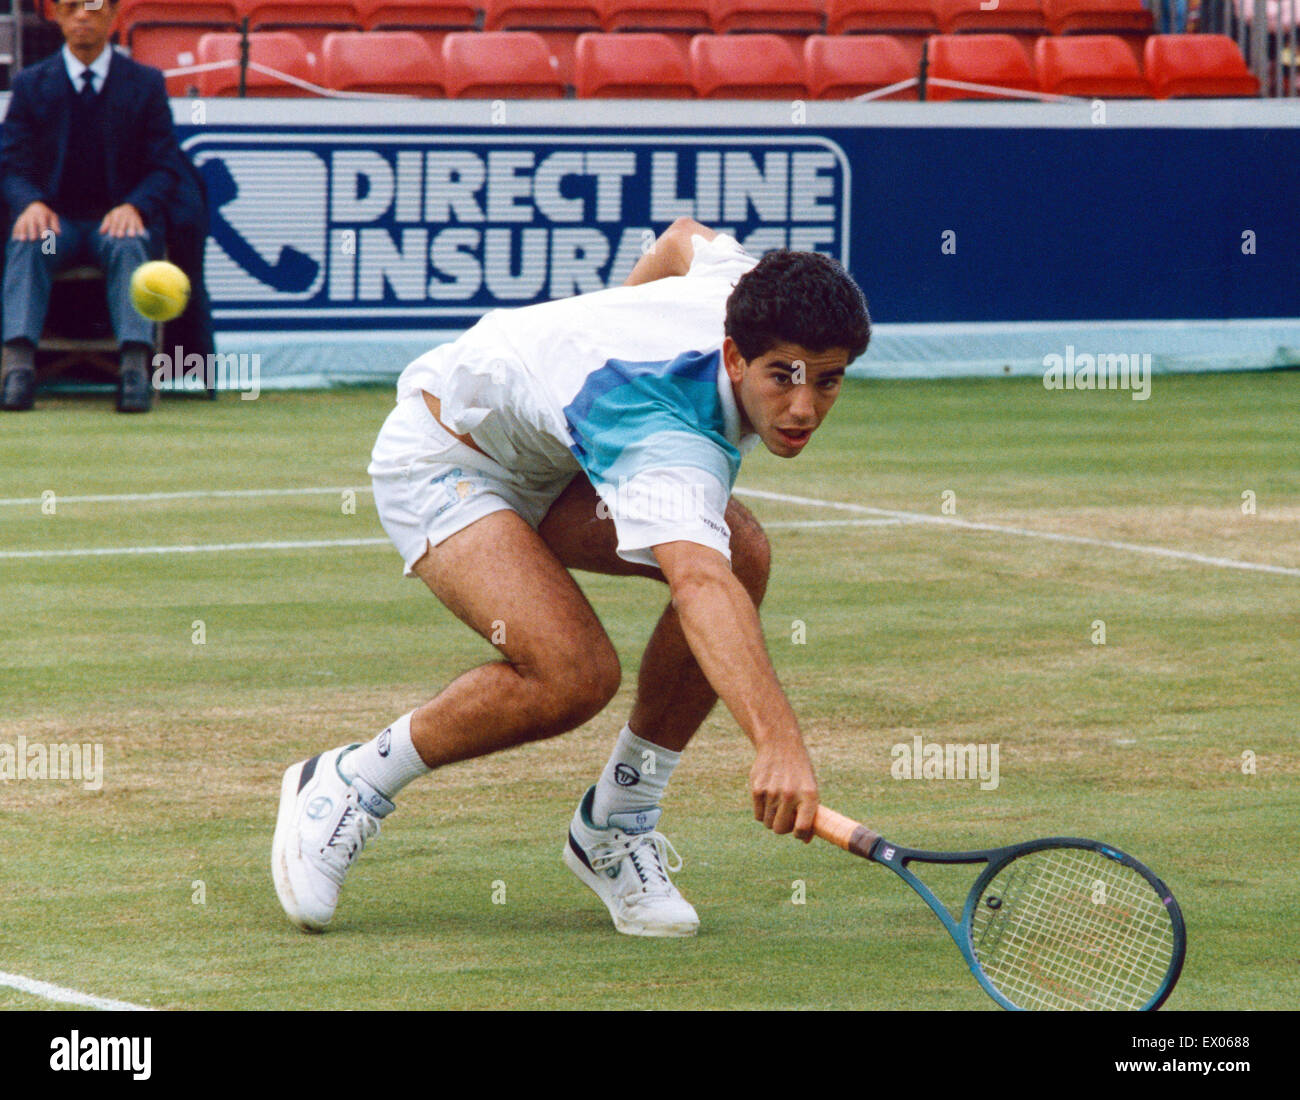 1991-manchester-open-held-at-northern-lawn-tennis-club-mens-singles-EX0688.jpg